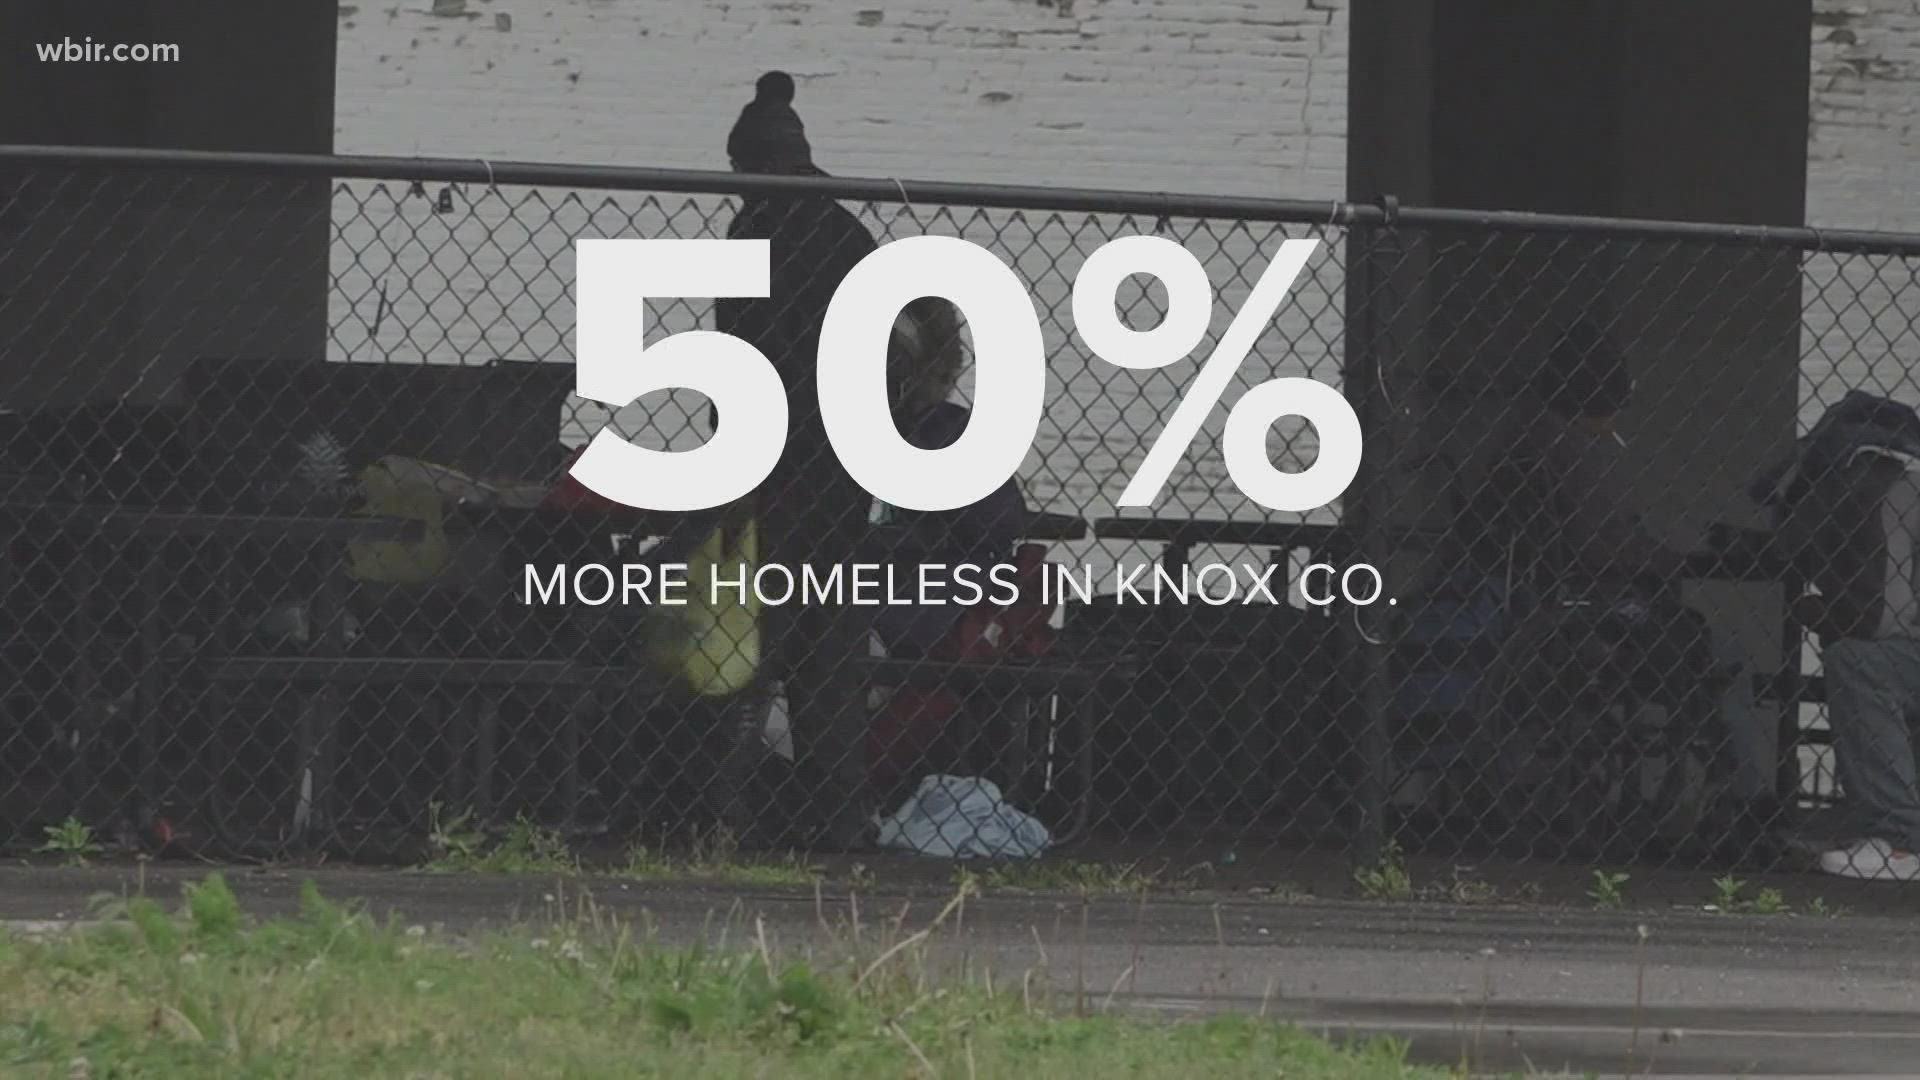 City leaders said the point-in-time count is used to determine who is living in unsheltered conditions or in emergency shelters at a specific moment in time.